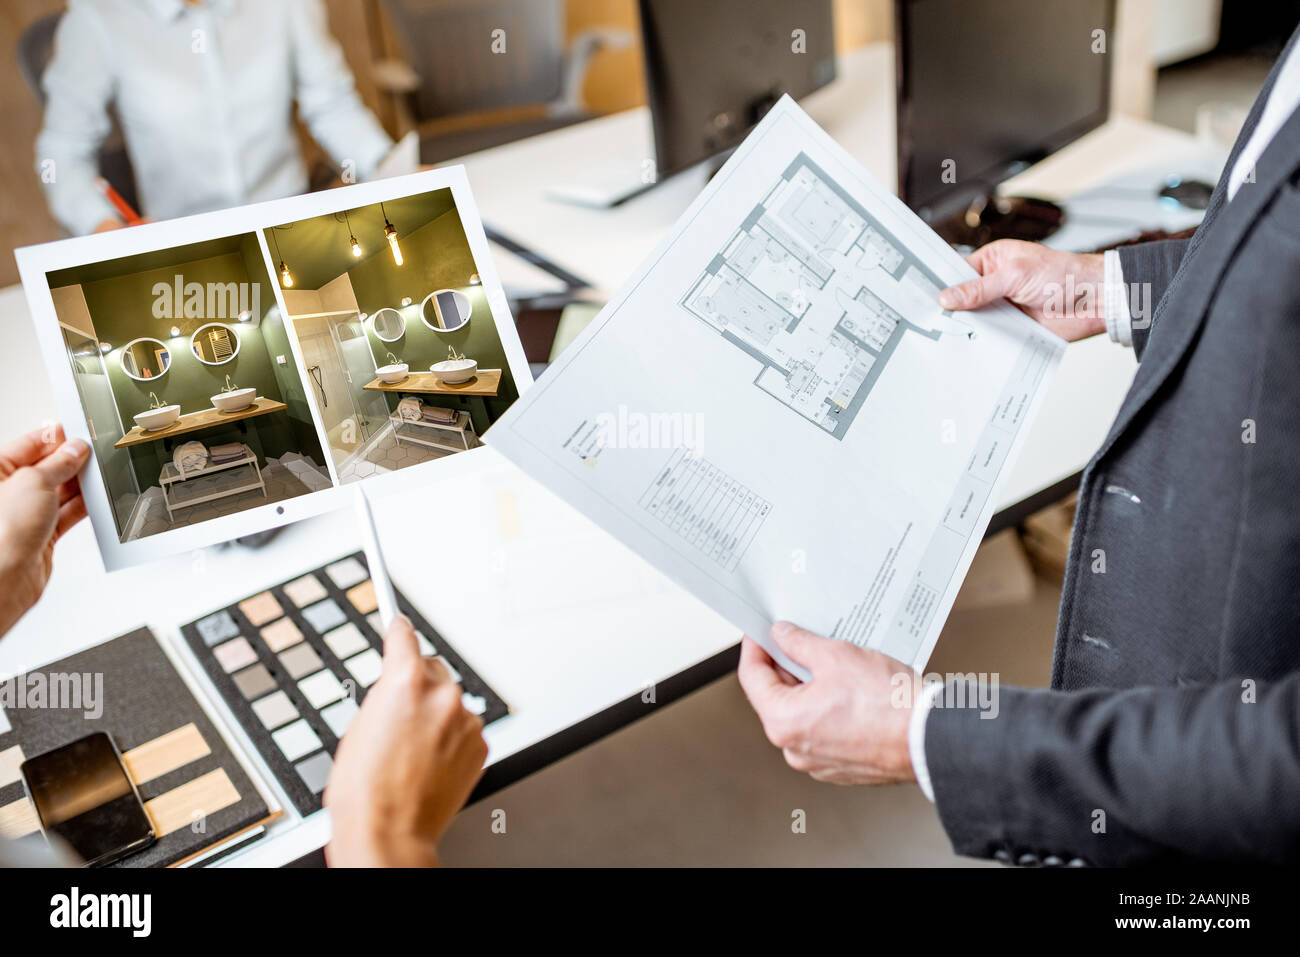 Creative office employees working on some architectural project, holding plans and interior renderings, close-up on the blueprints Stock Photo